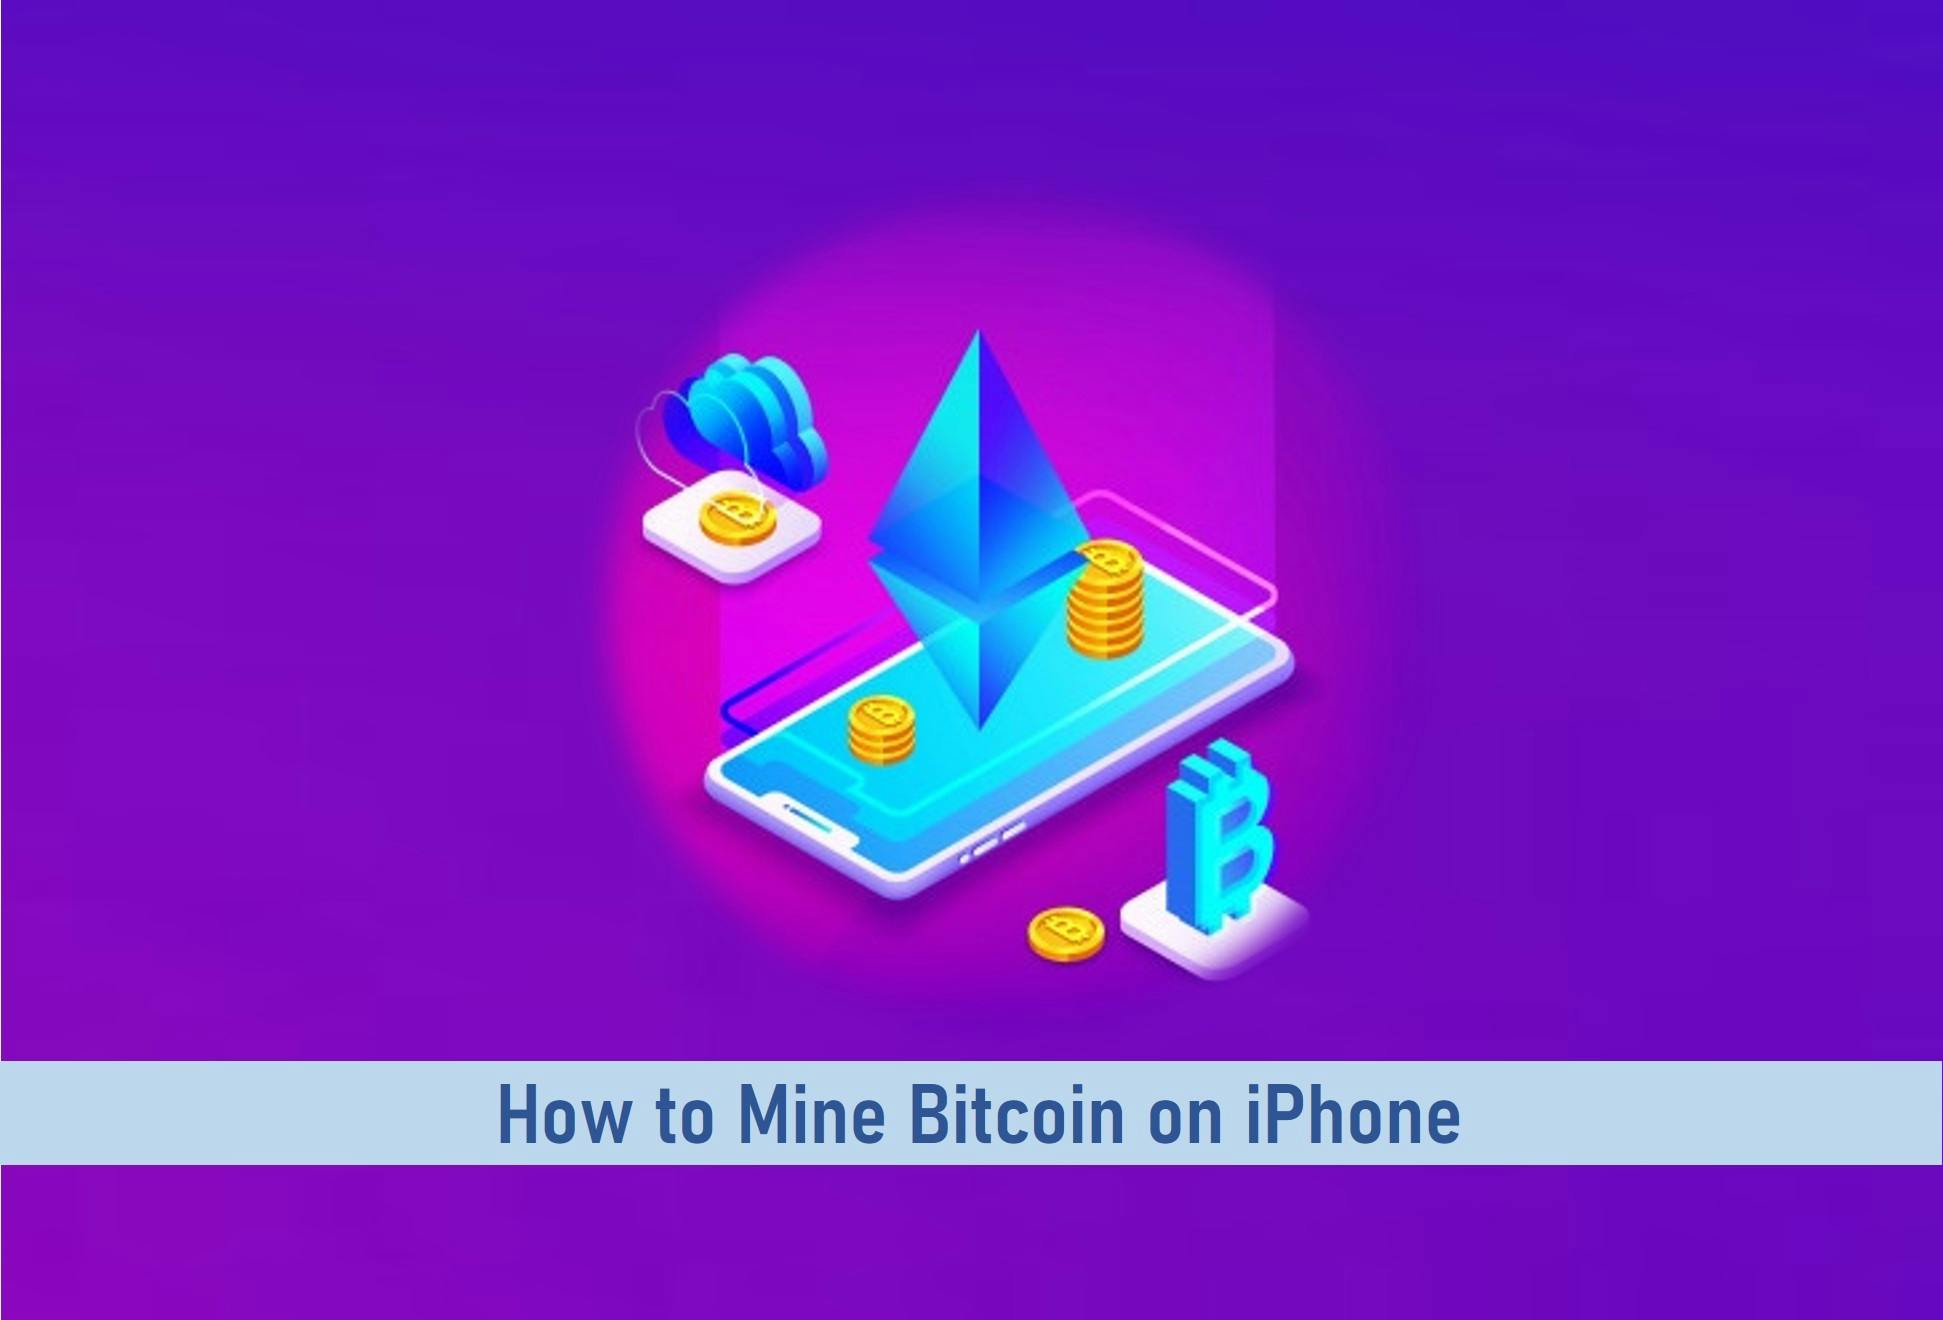 How to Mine Bitcoin on iPhone